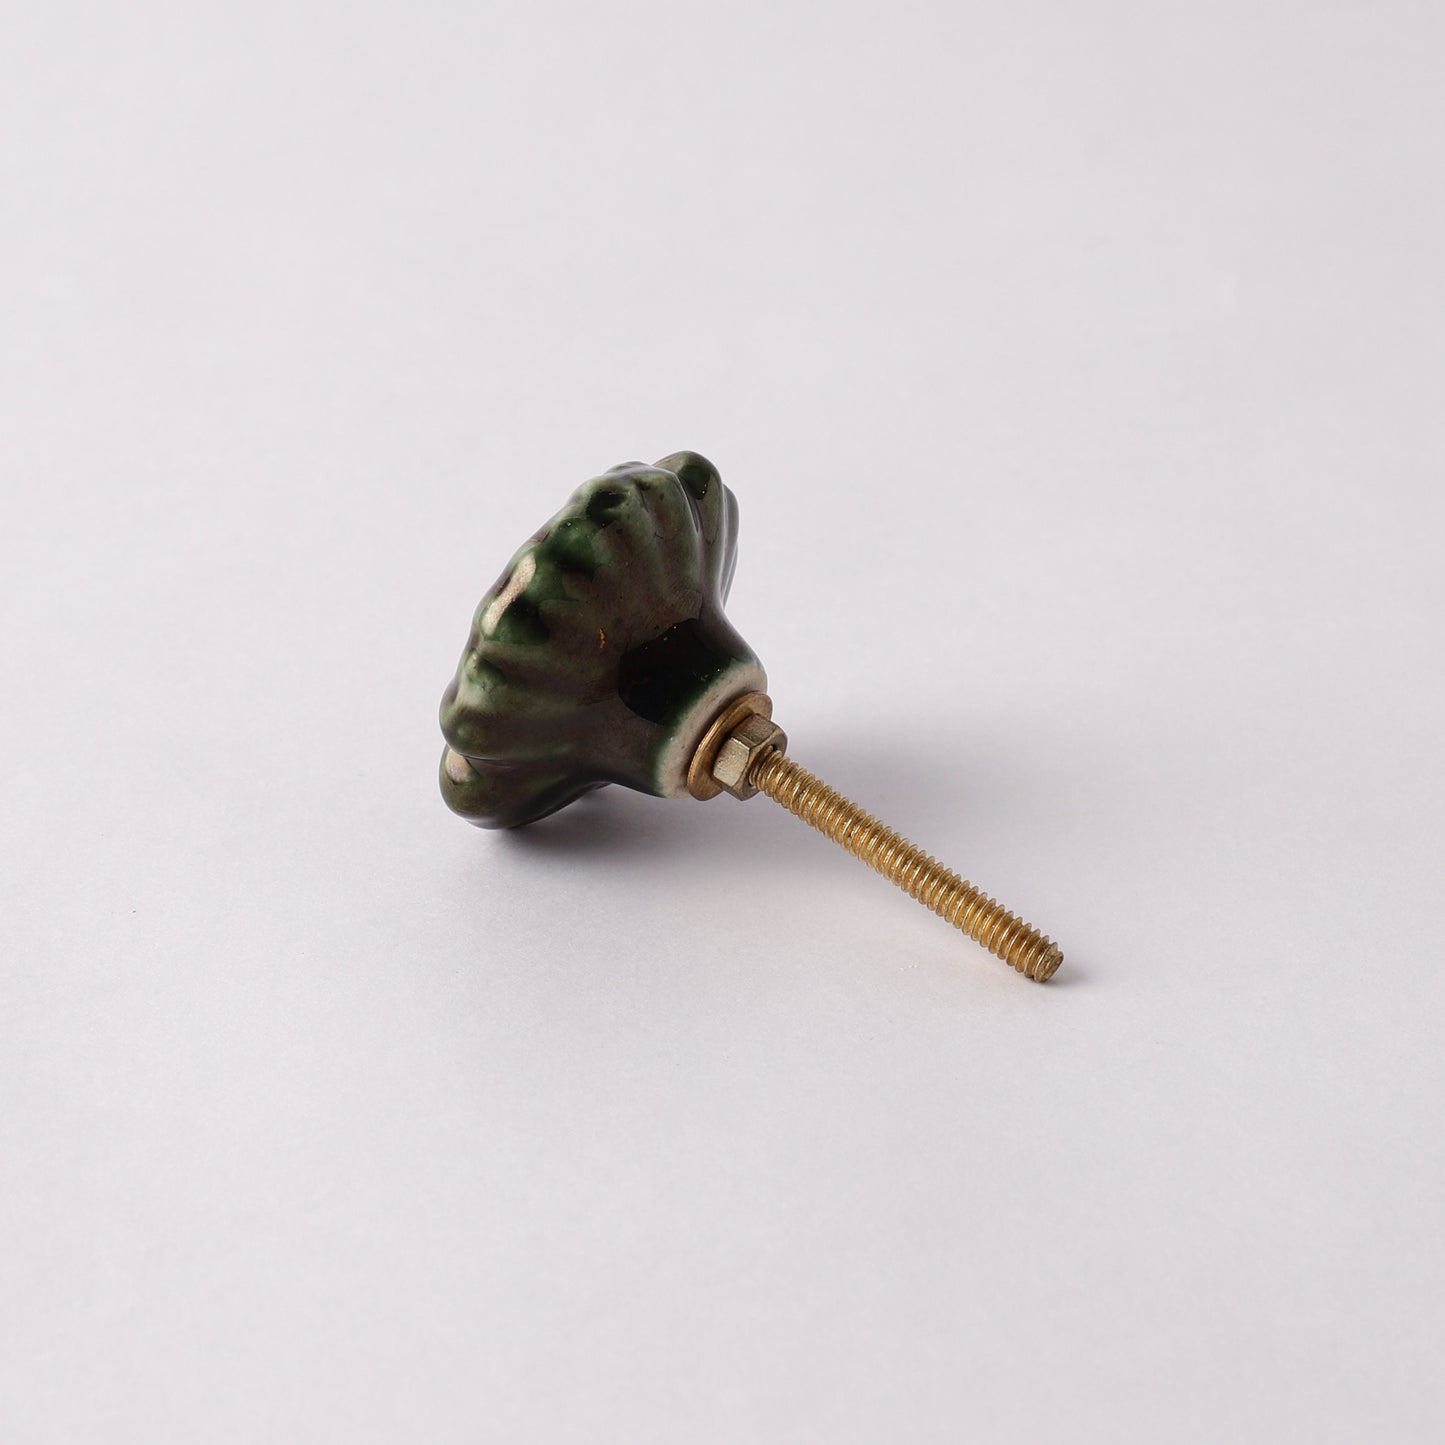 Bronzed With an Aged Green Floral Ceramic Pull Knobs (C4)